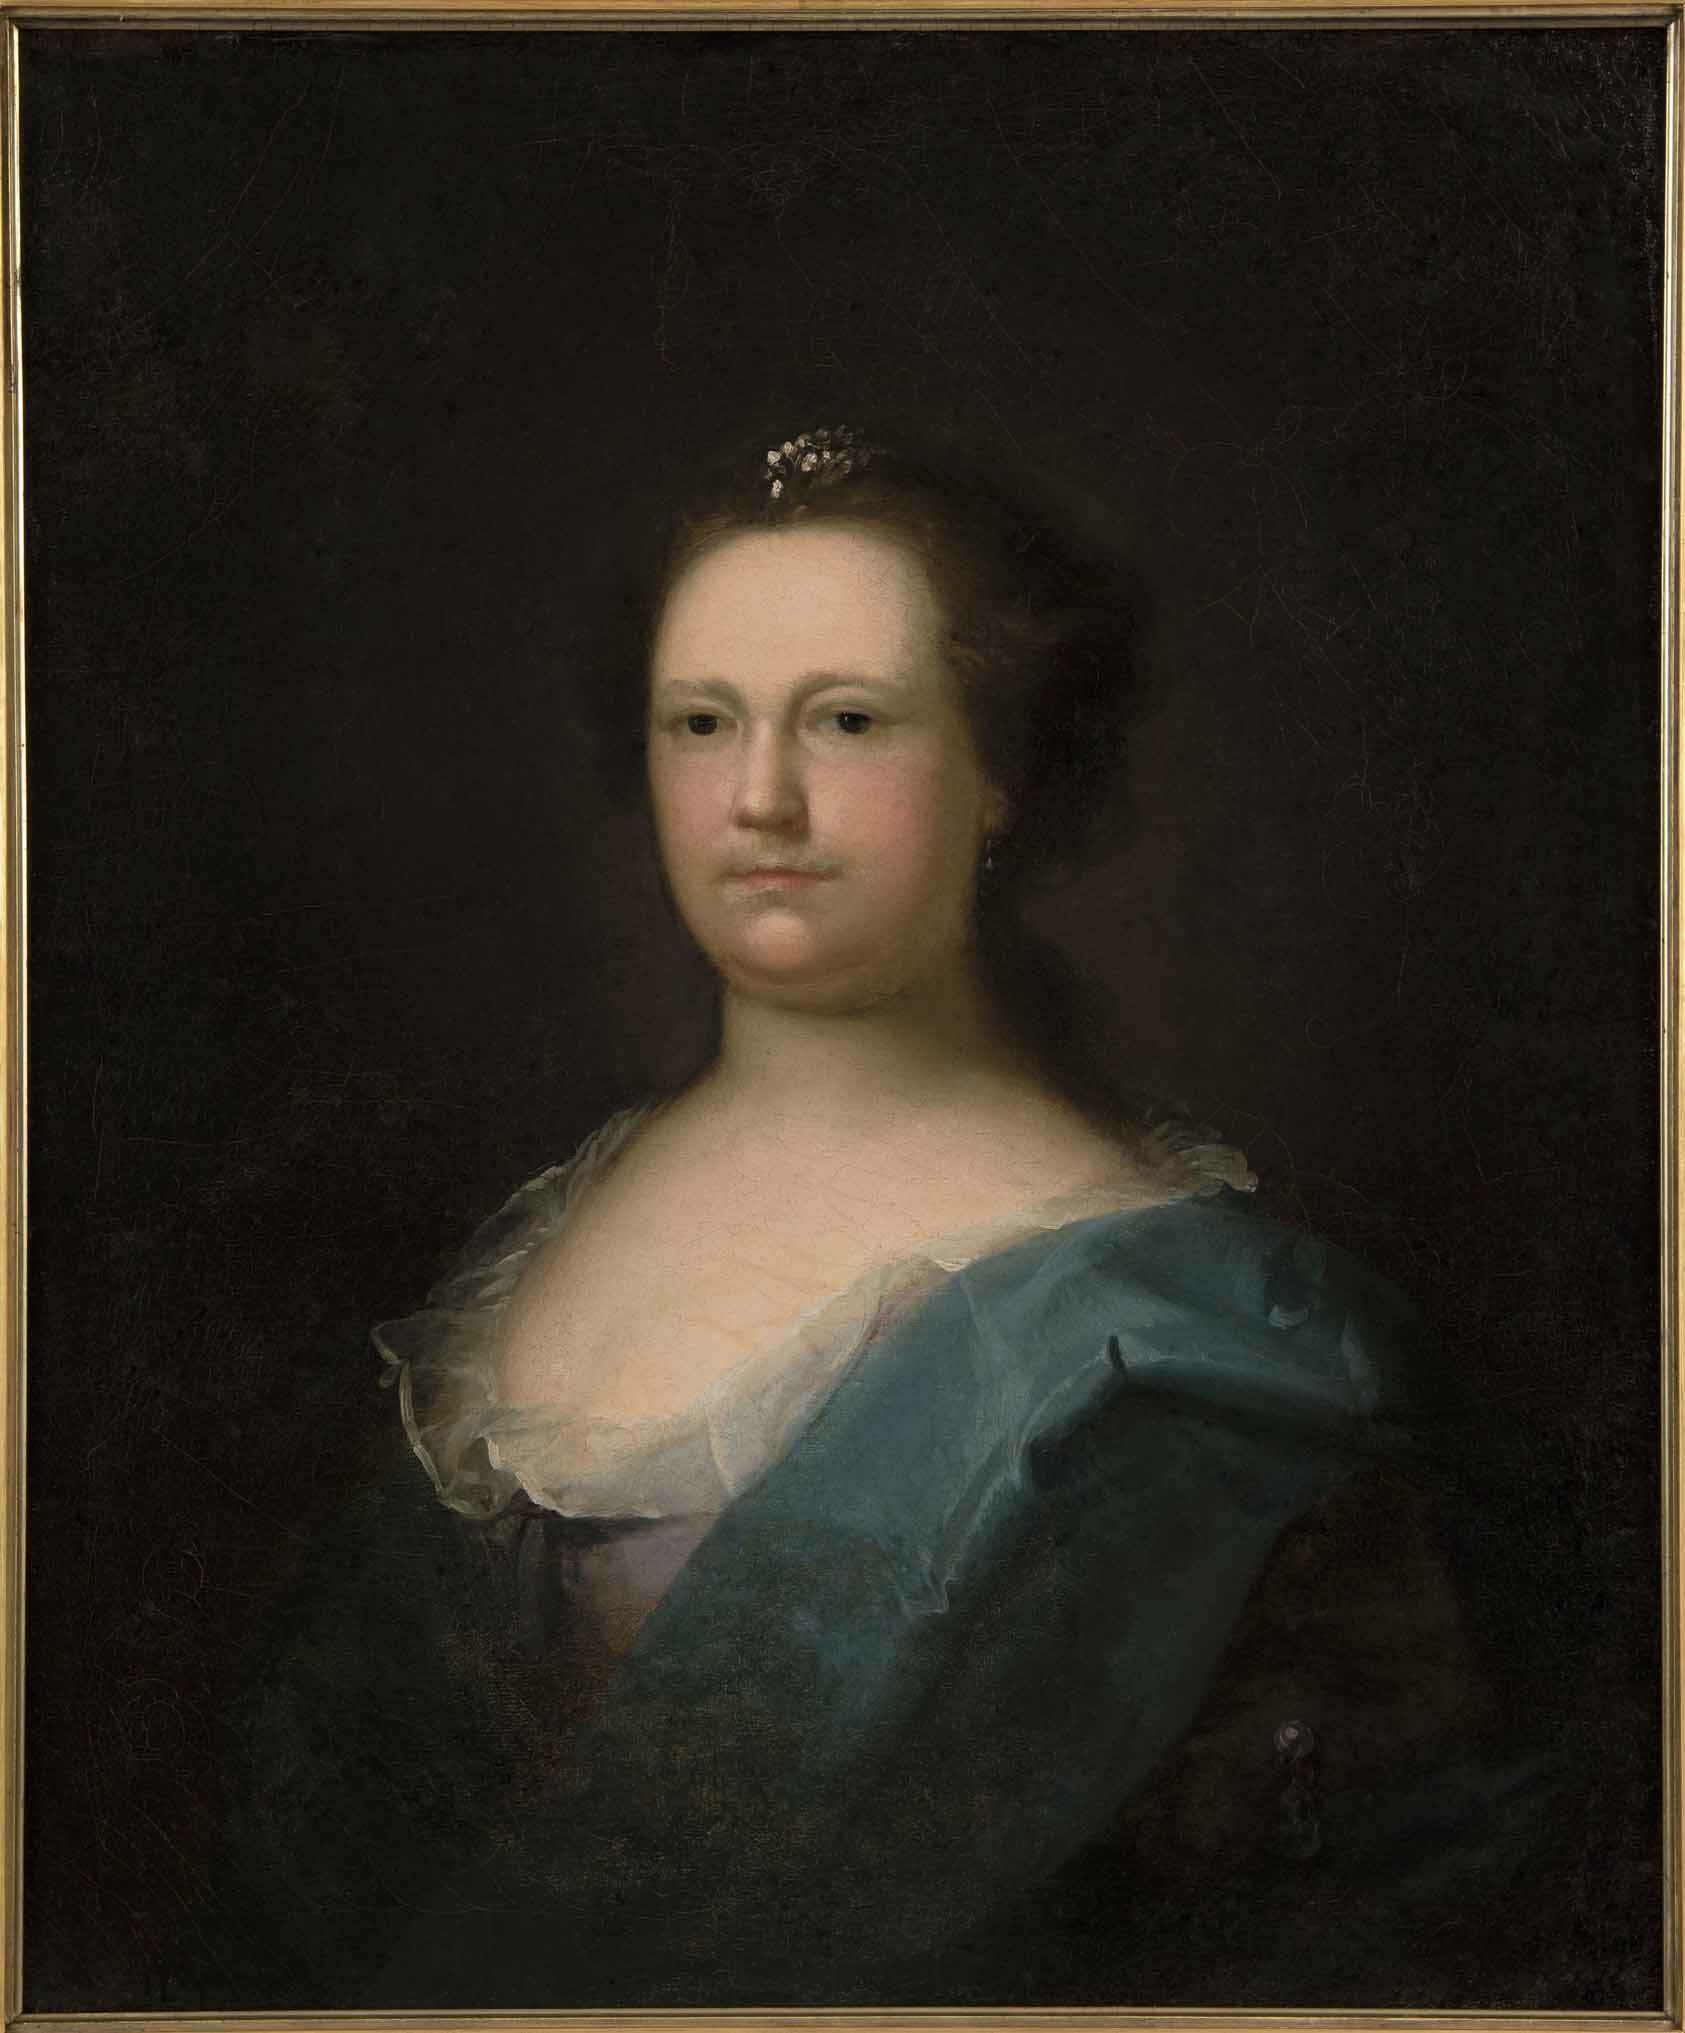 Portrait believed to be of Benjamin Franklin's mother, Abiah Folger Franklin, from 1707.